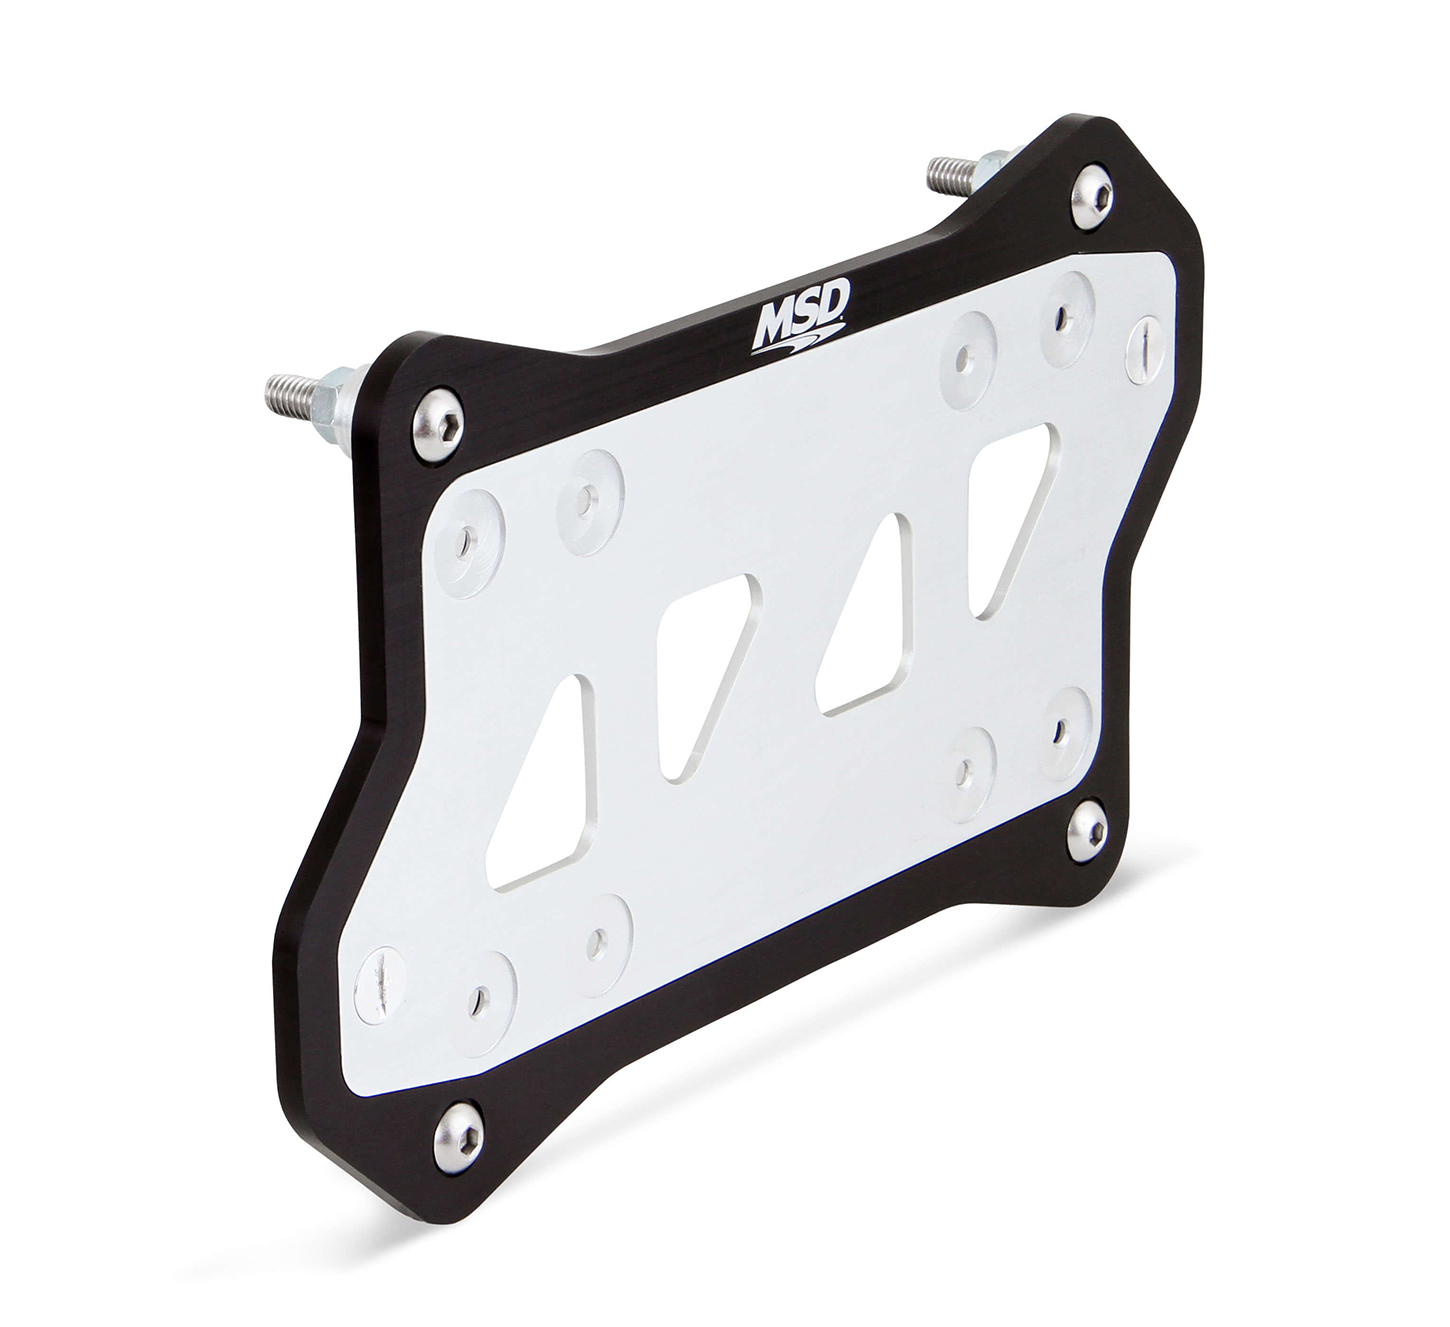 MSD Ignition 82182 Ignition Box Bracket, Aluminum, Black / Clear Anodized, MSD Ignition Boxes, Kit